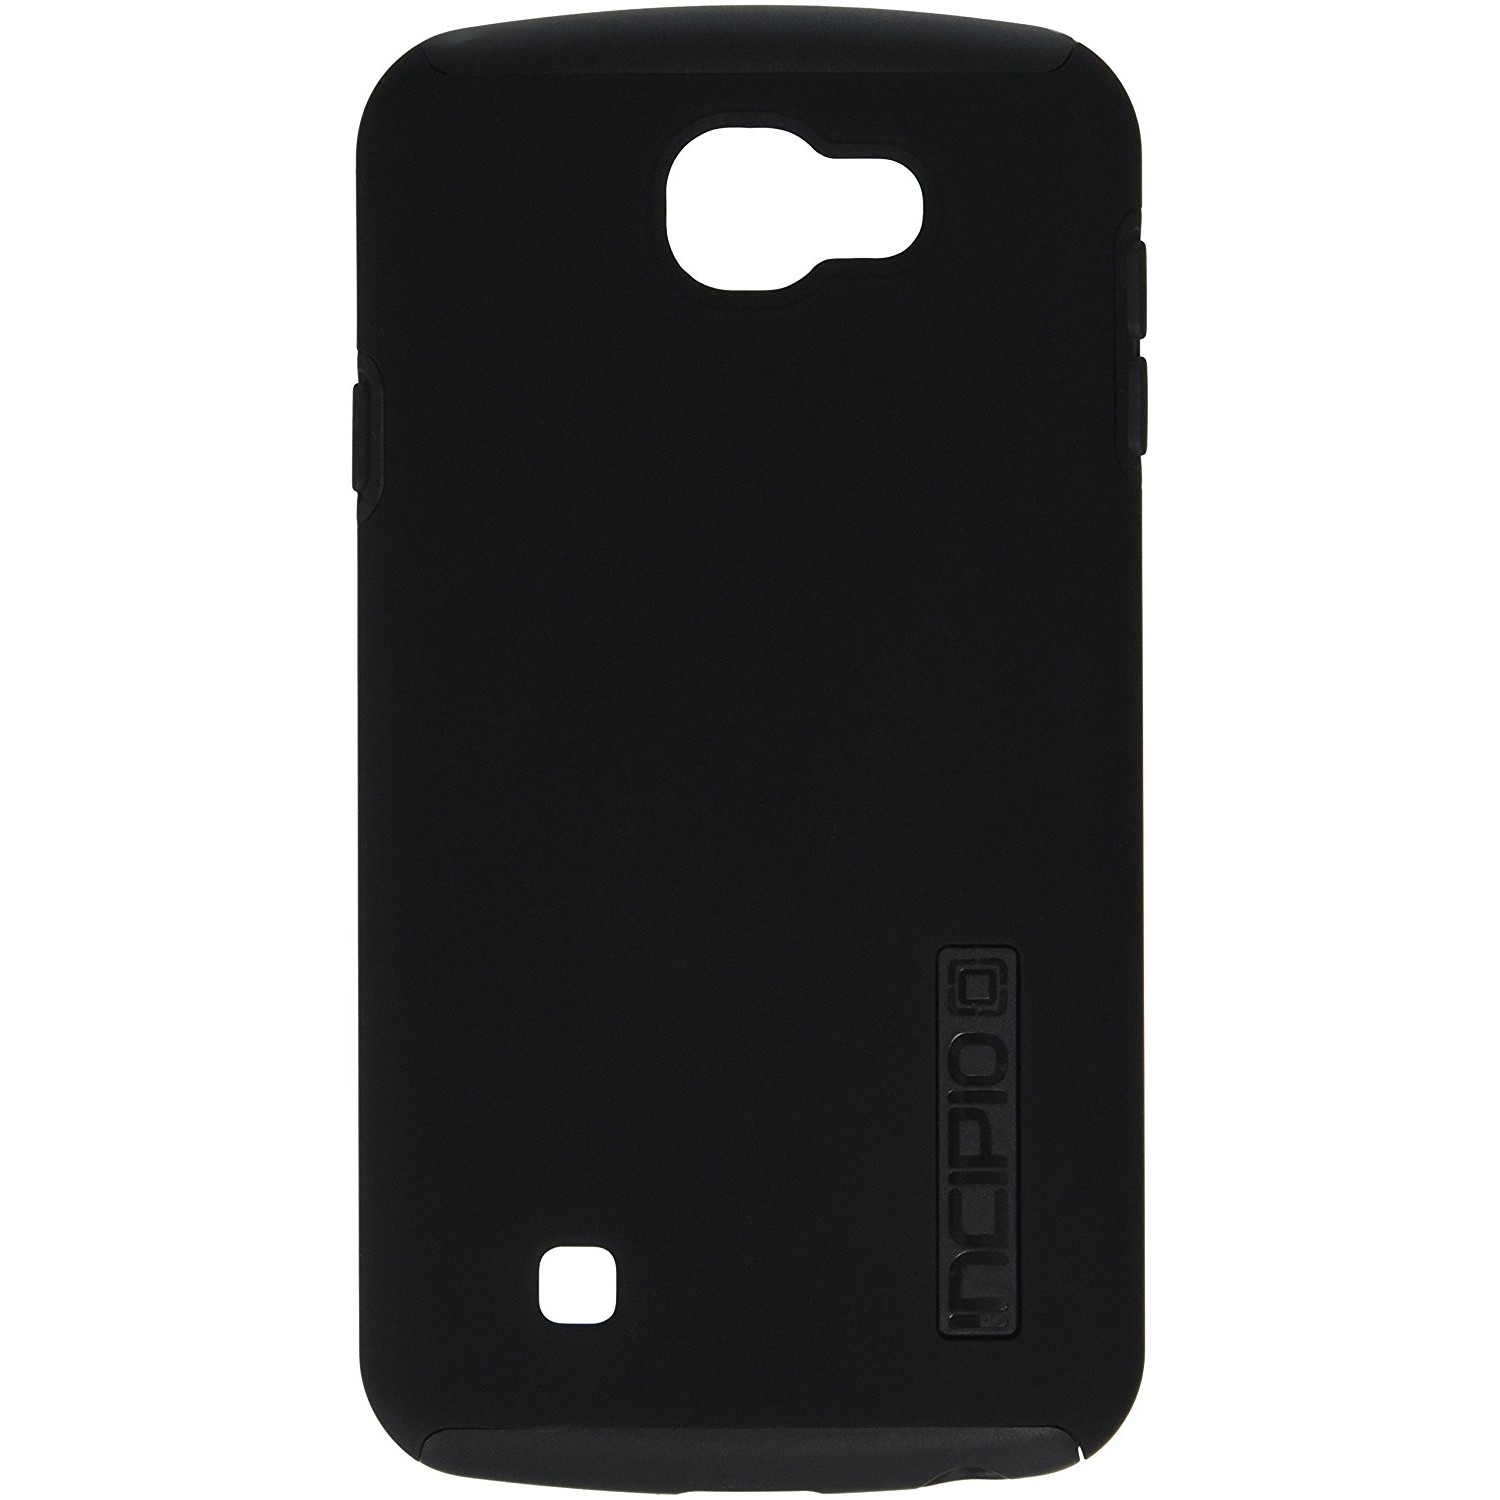 Incipio Fitted Hard Shell Case for LG K4 - Black